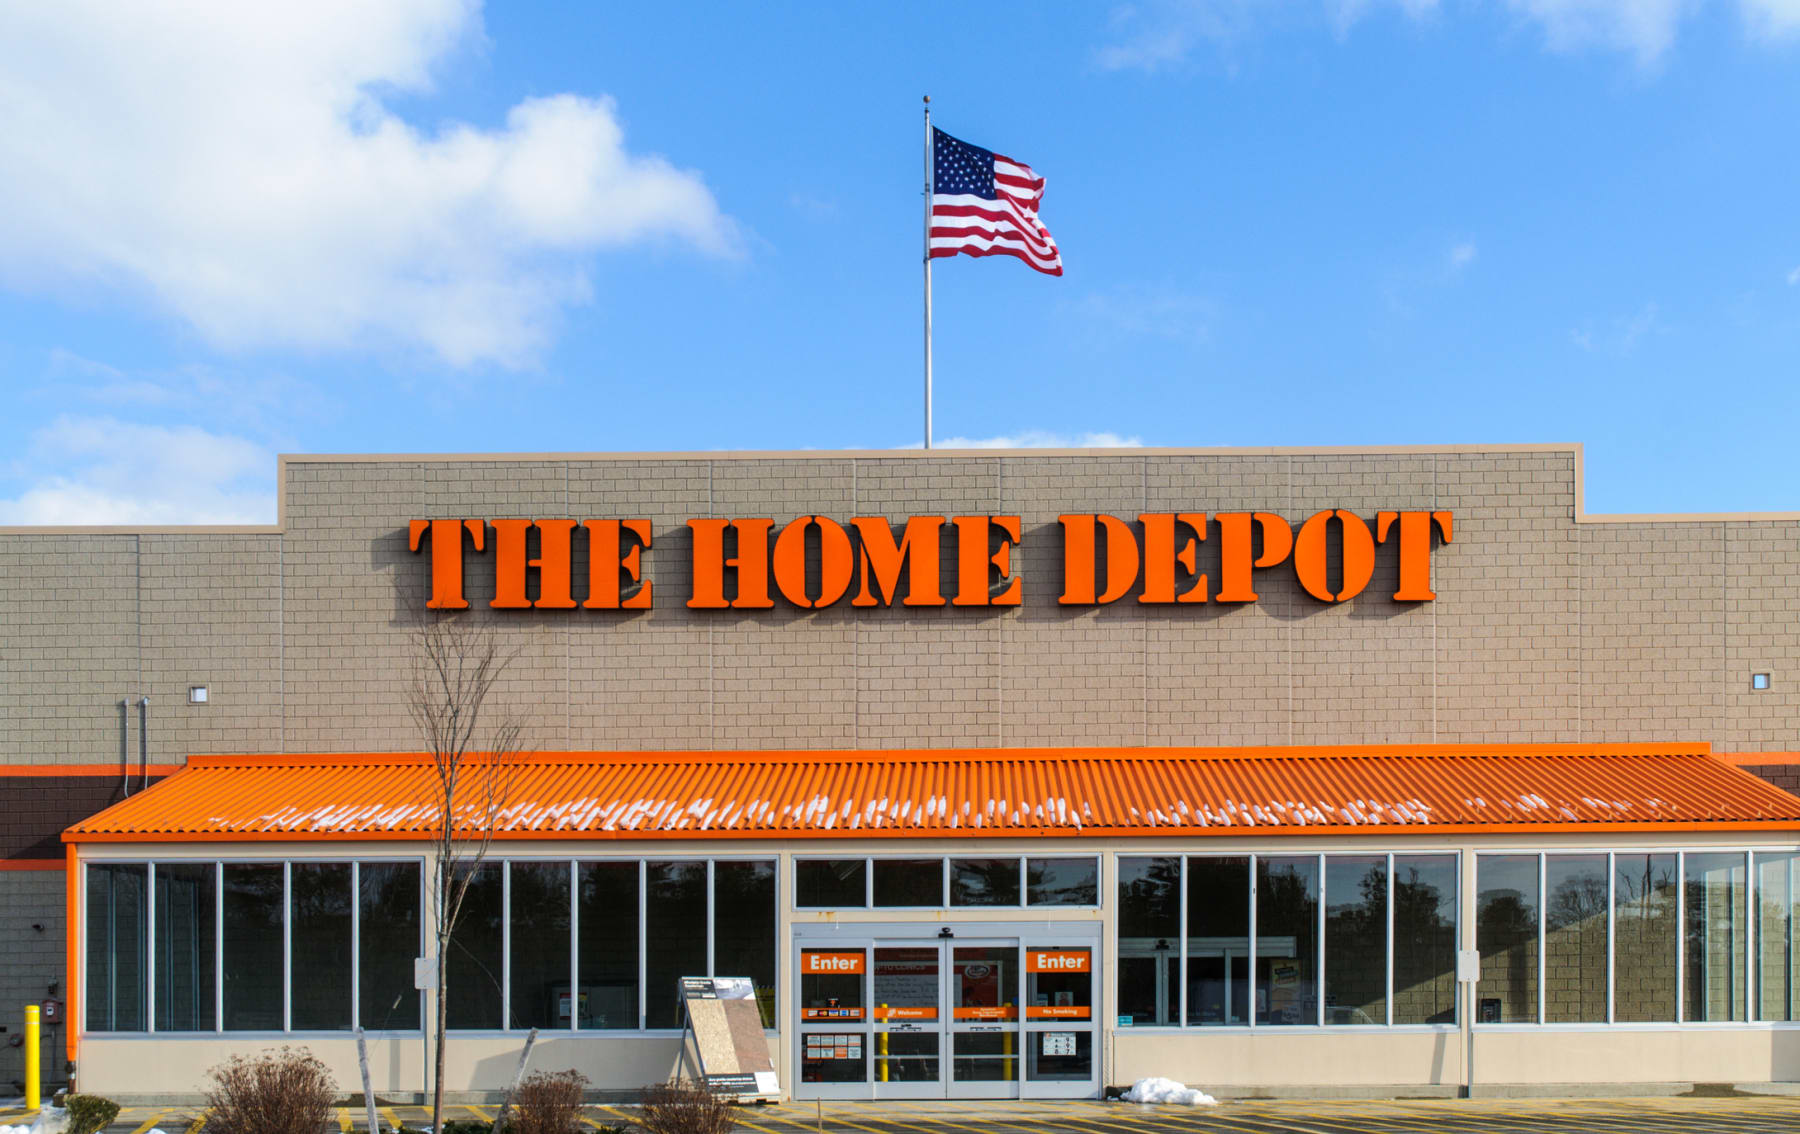 A Home Depot storefront with an American flag flying over it